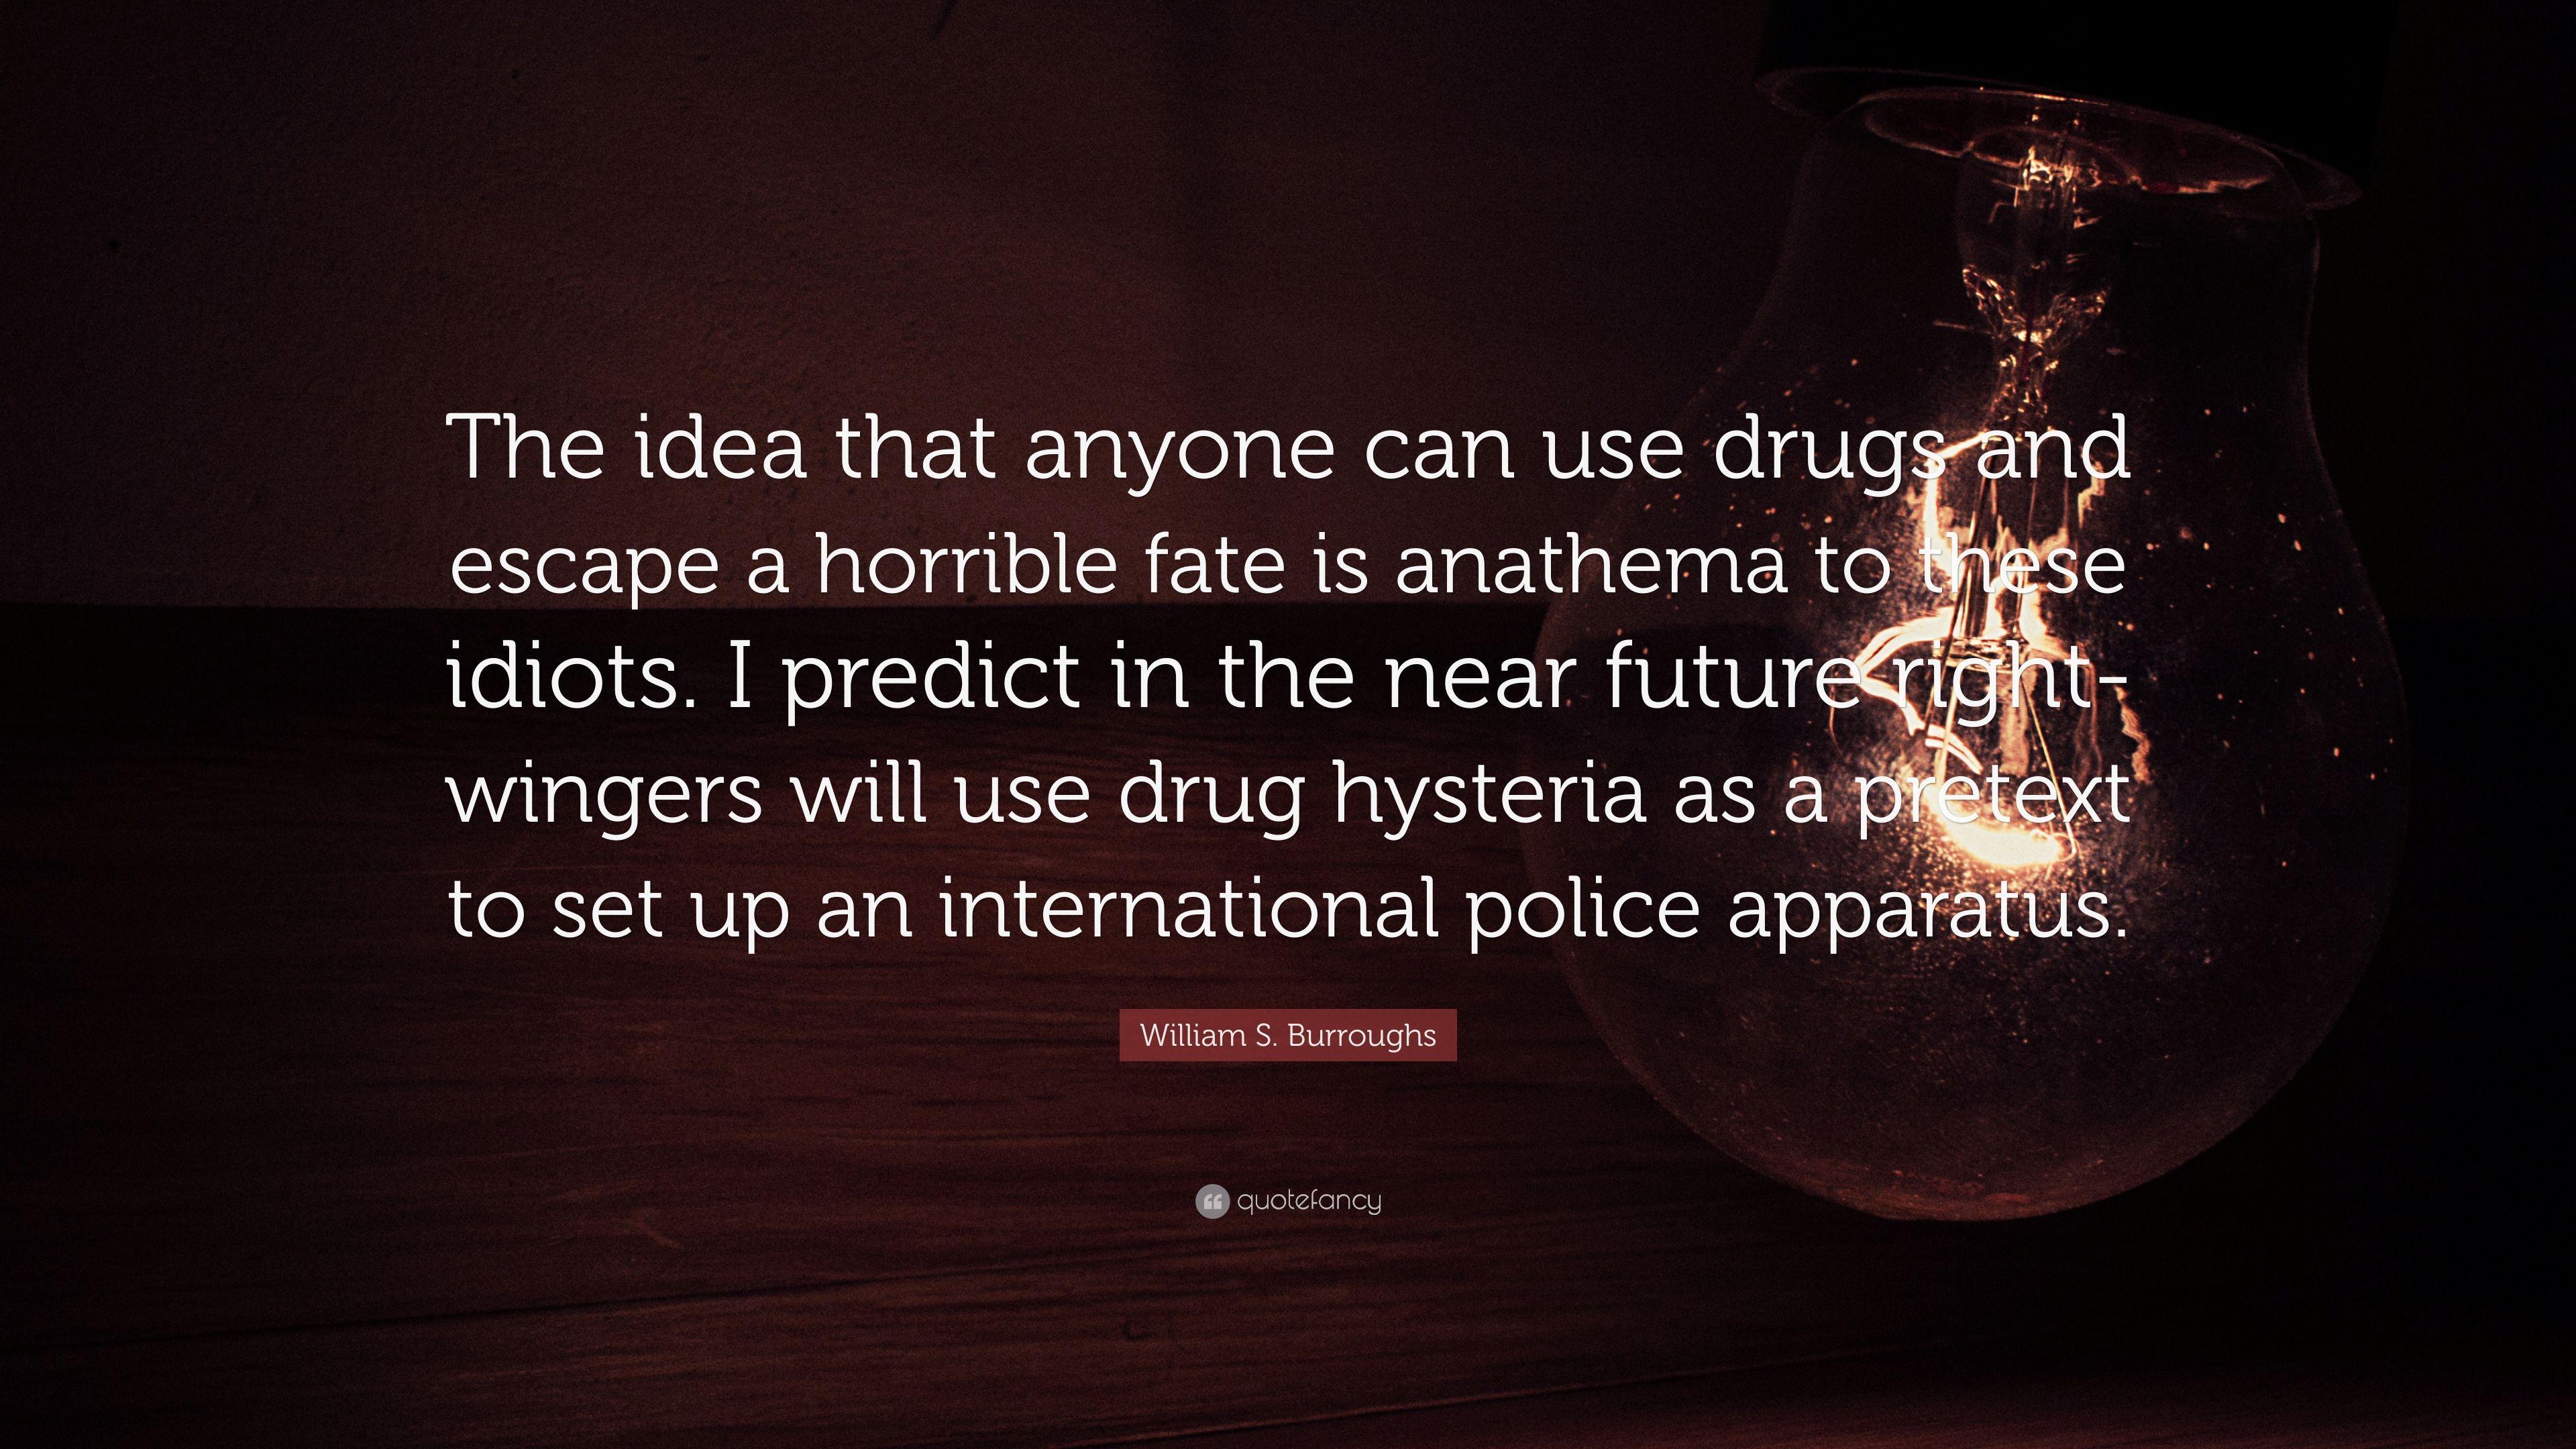 William S. Burroughs Quote: “The idea that anyone can use drugs